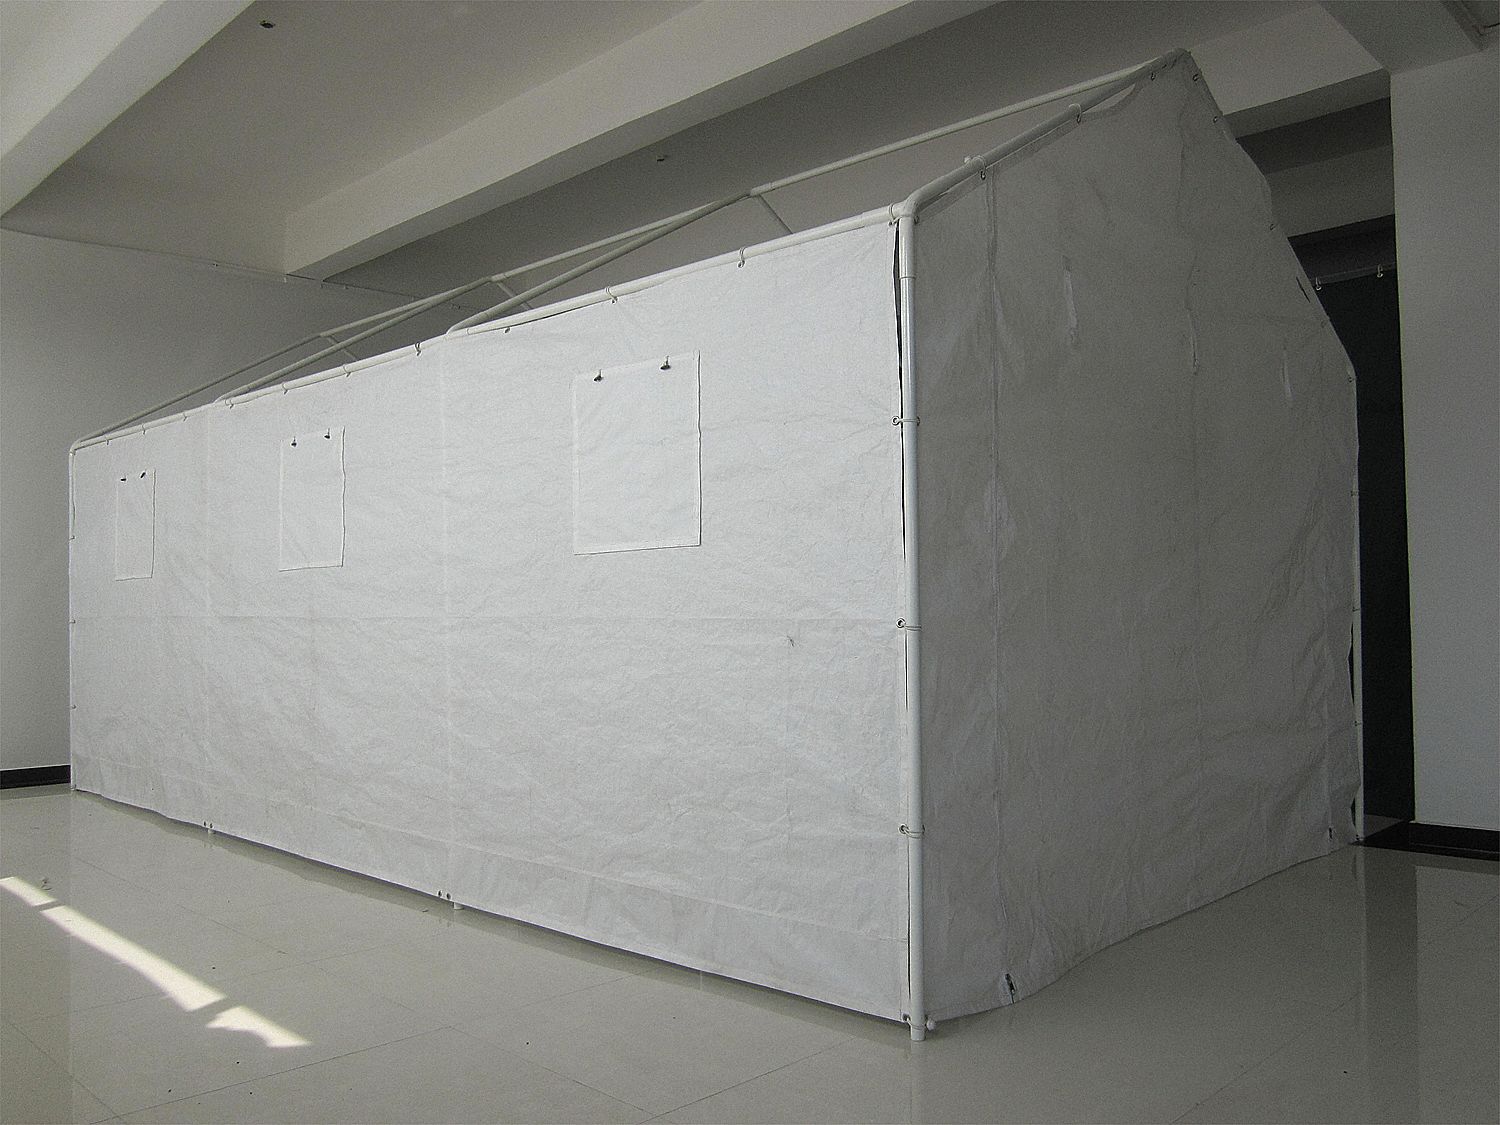 11C548 - Solid Wall Kit for 10x20 Ft Canopy